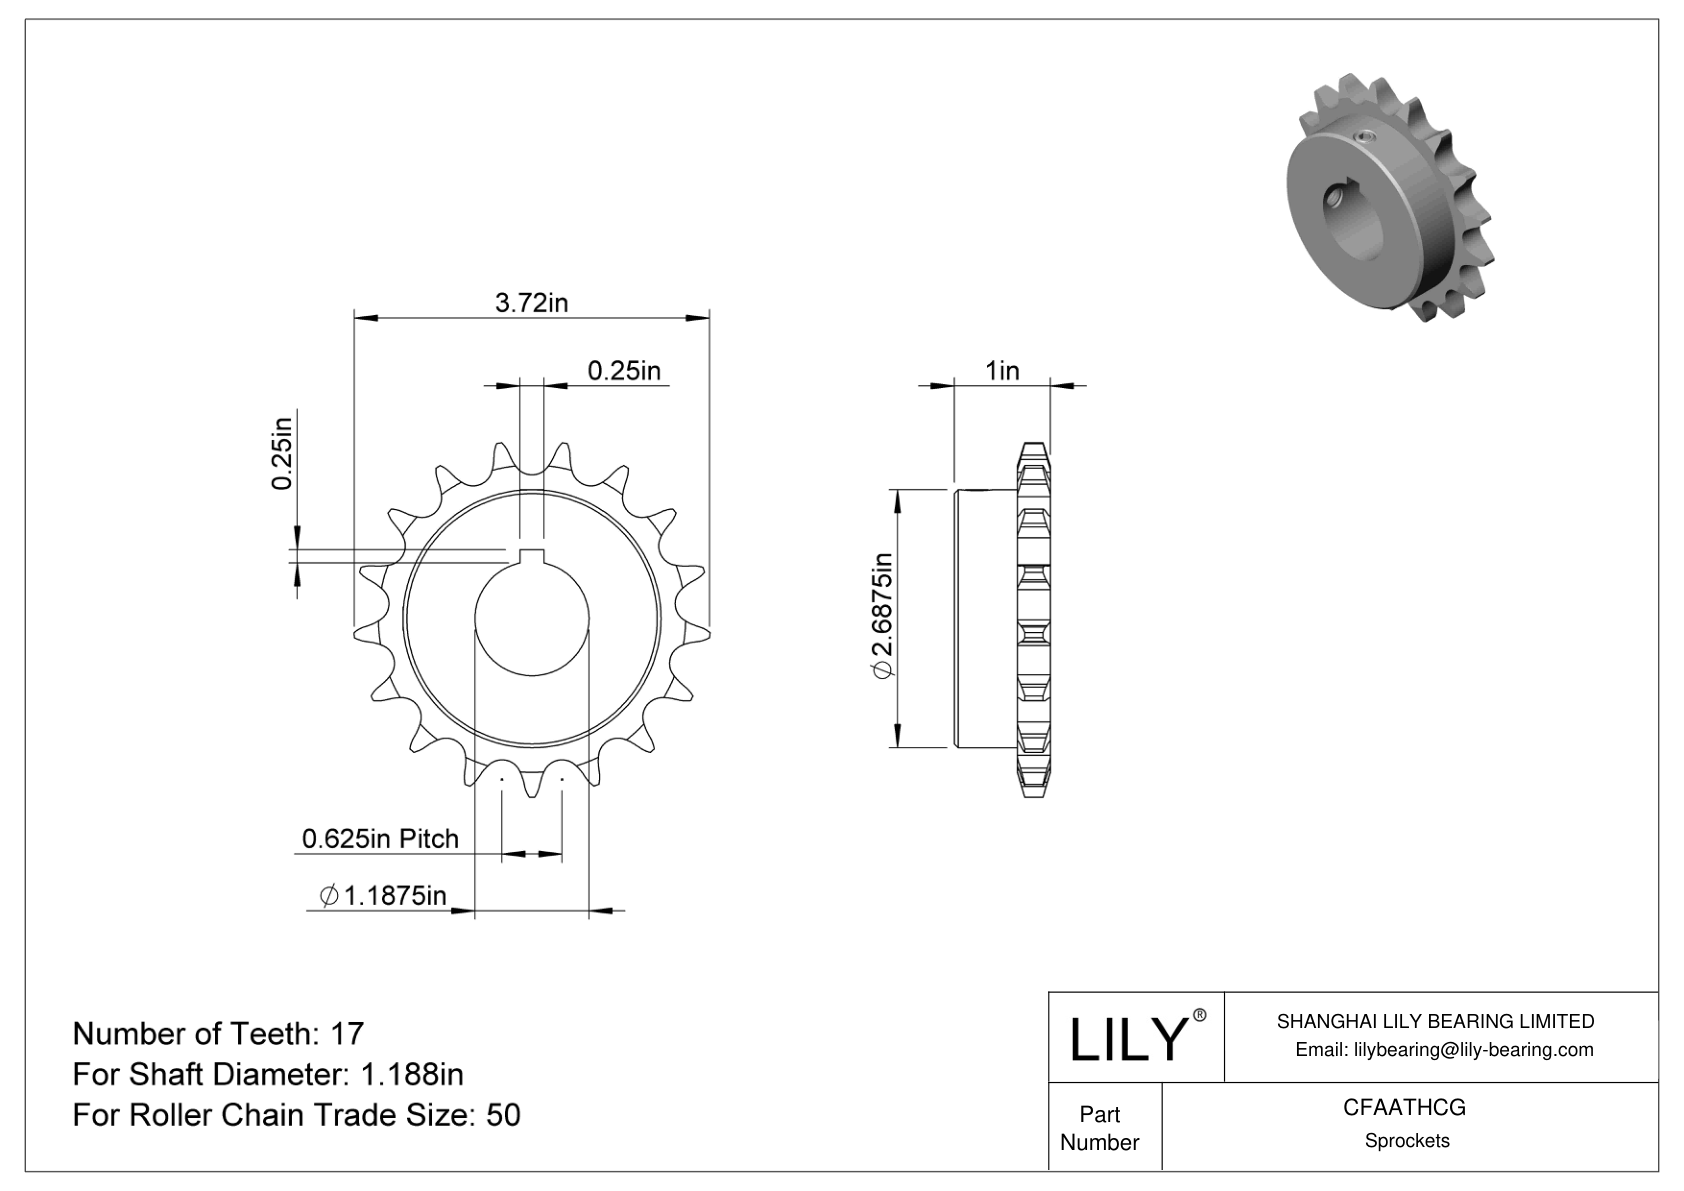 CFAATHCG Wear-Resistant Sprockets for ANSI Roller Chain cad drawing